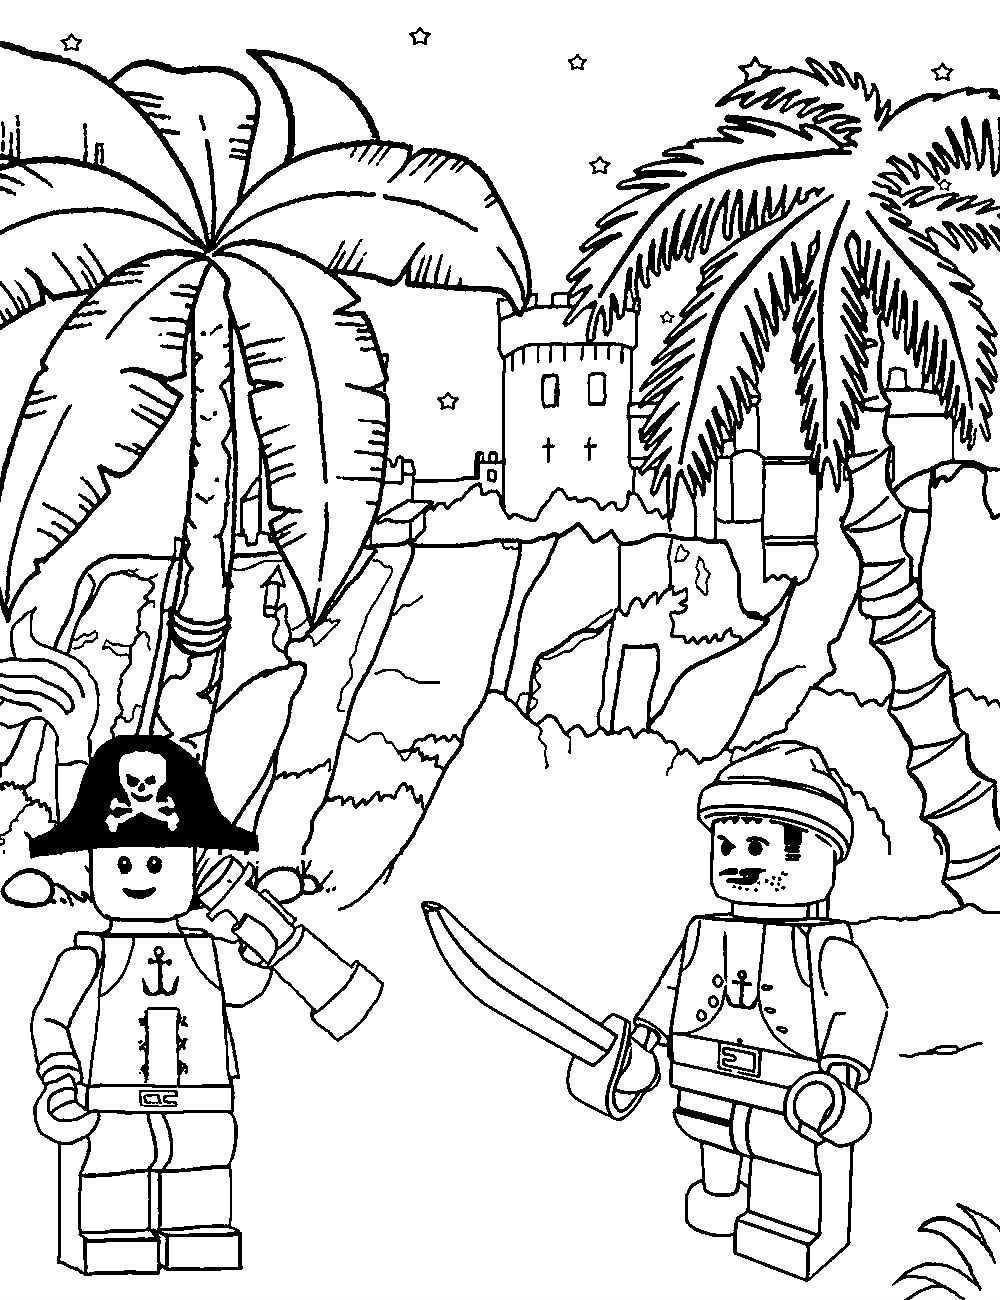 Pirates Toys Coloring Pages For Kids Gng Printable Pirates Coloring Pages For Kids Pi